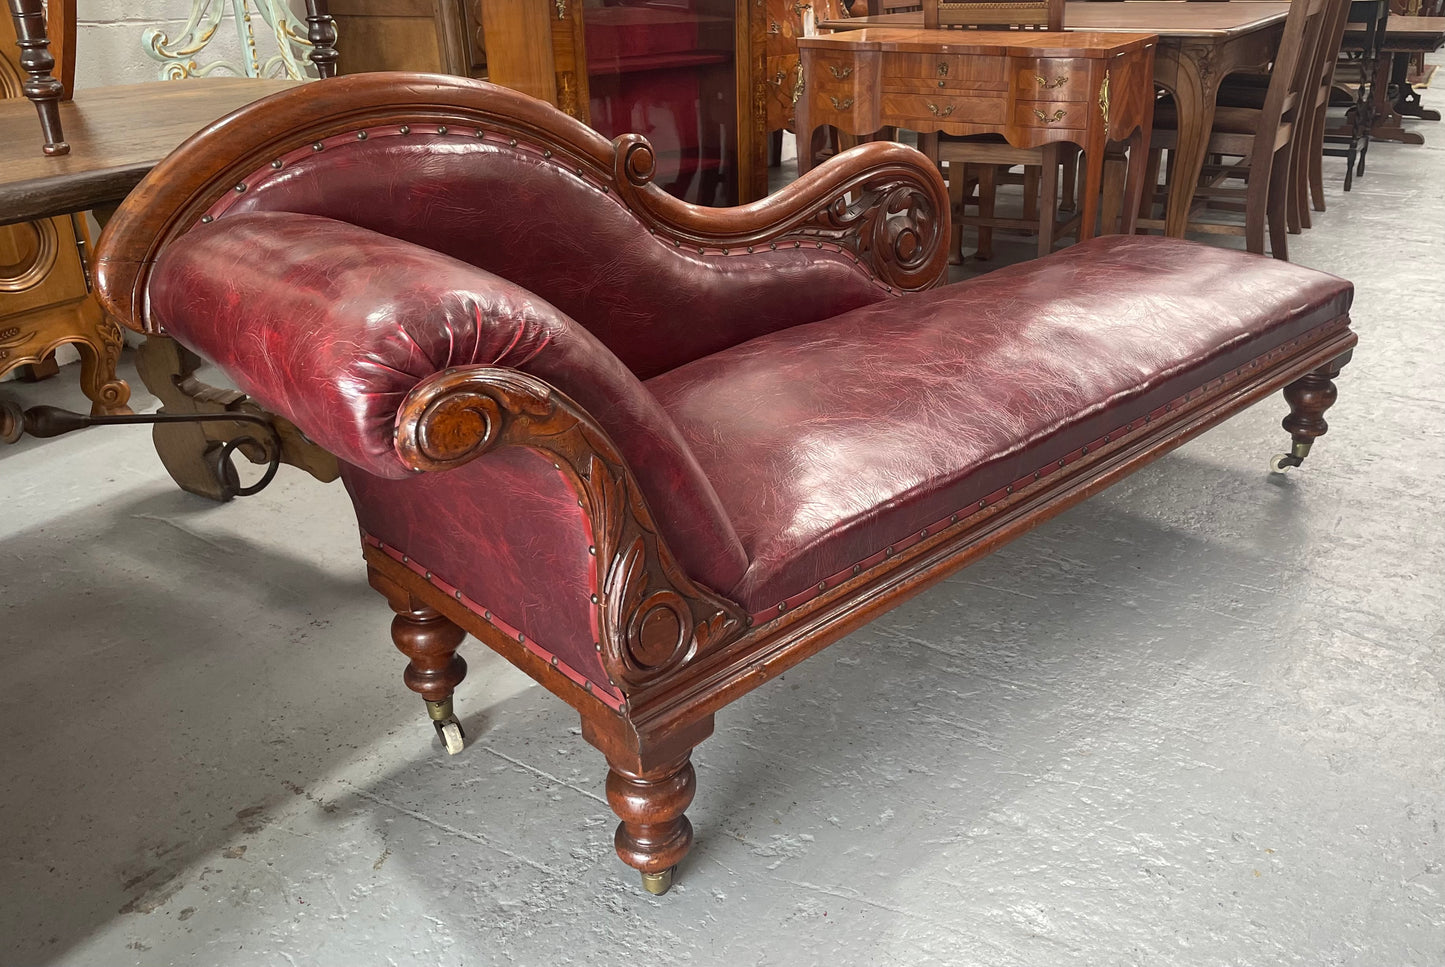 Cedar  Chaise Lounge With Faux Leather Upholster